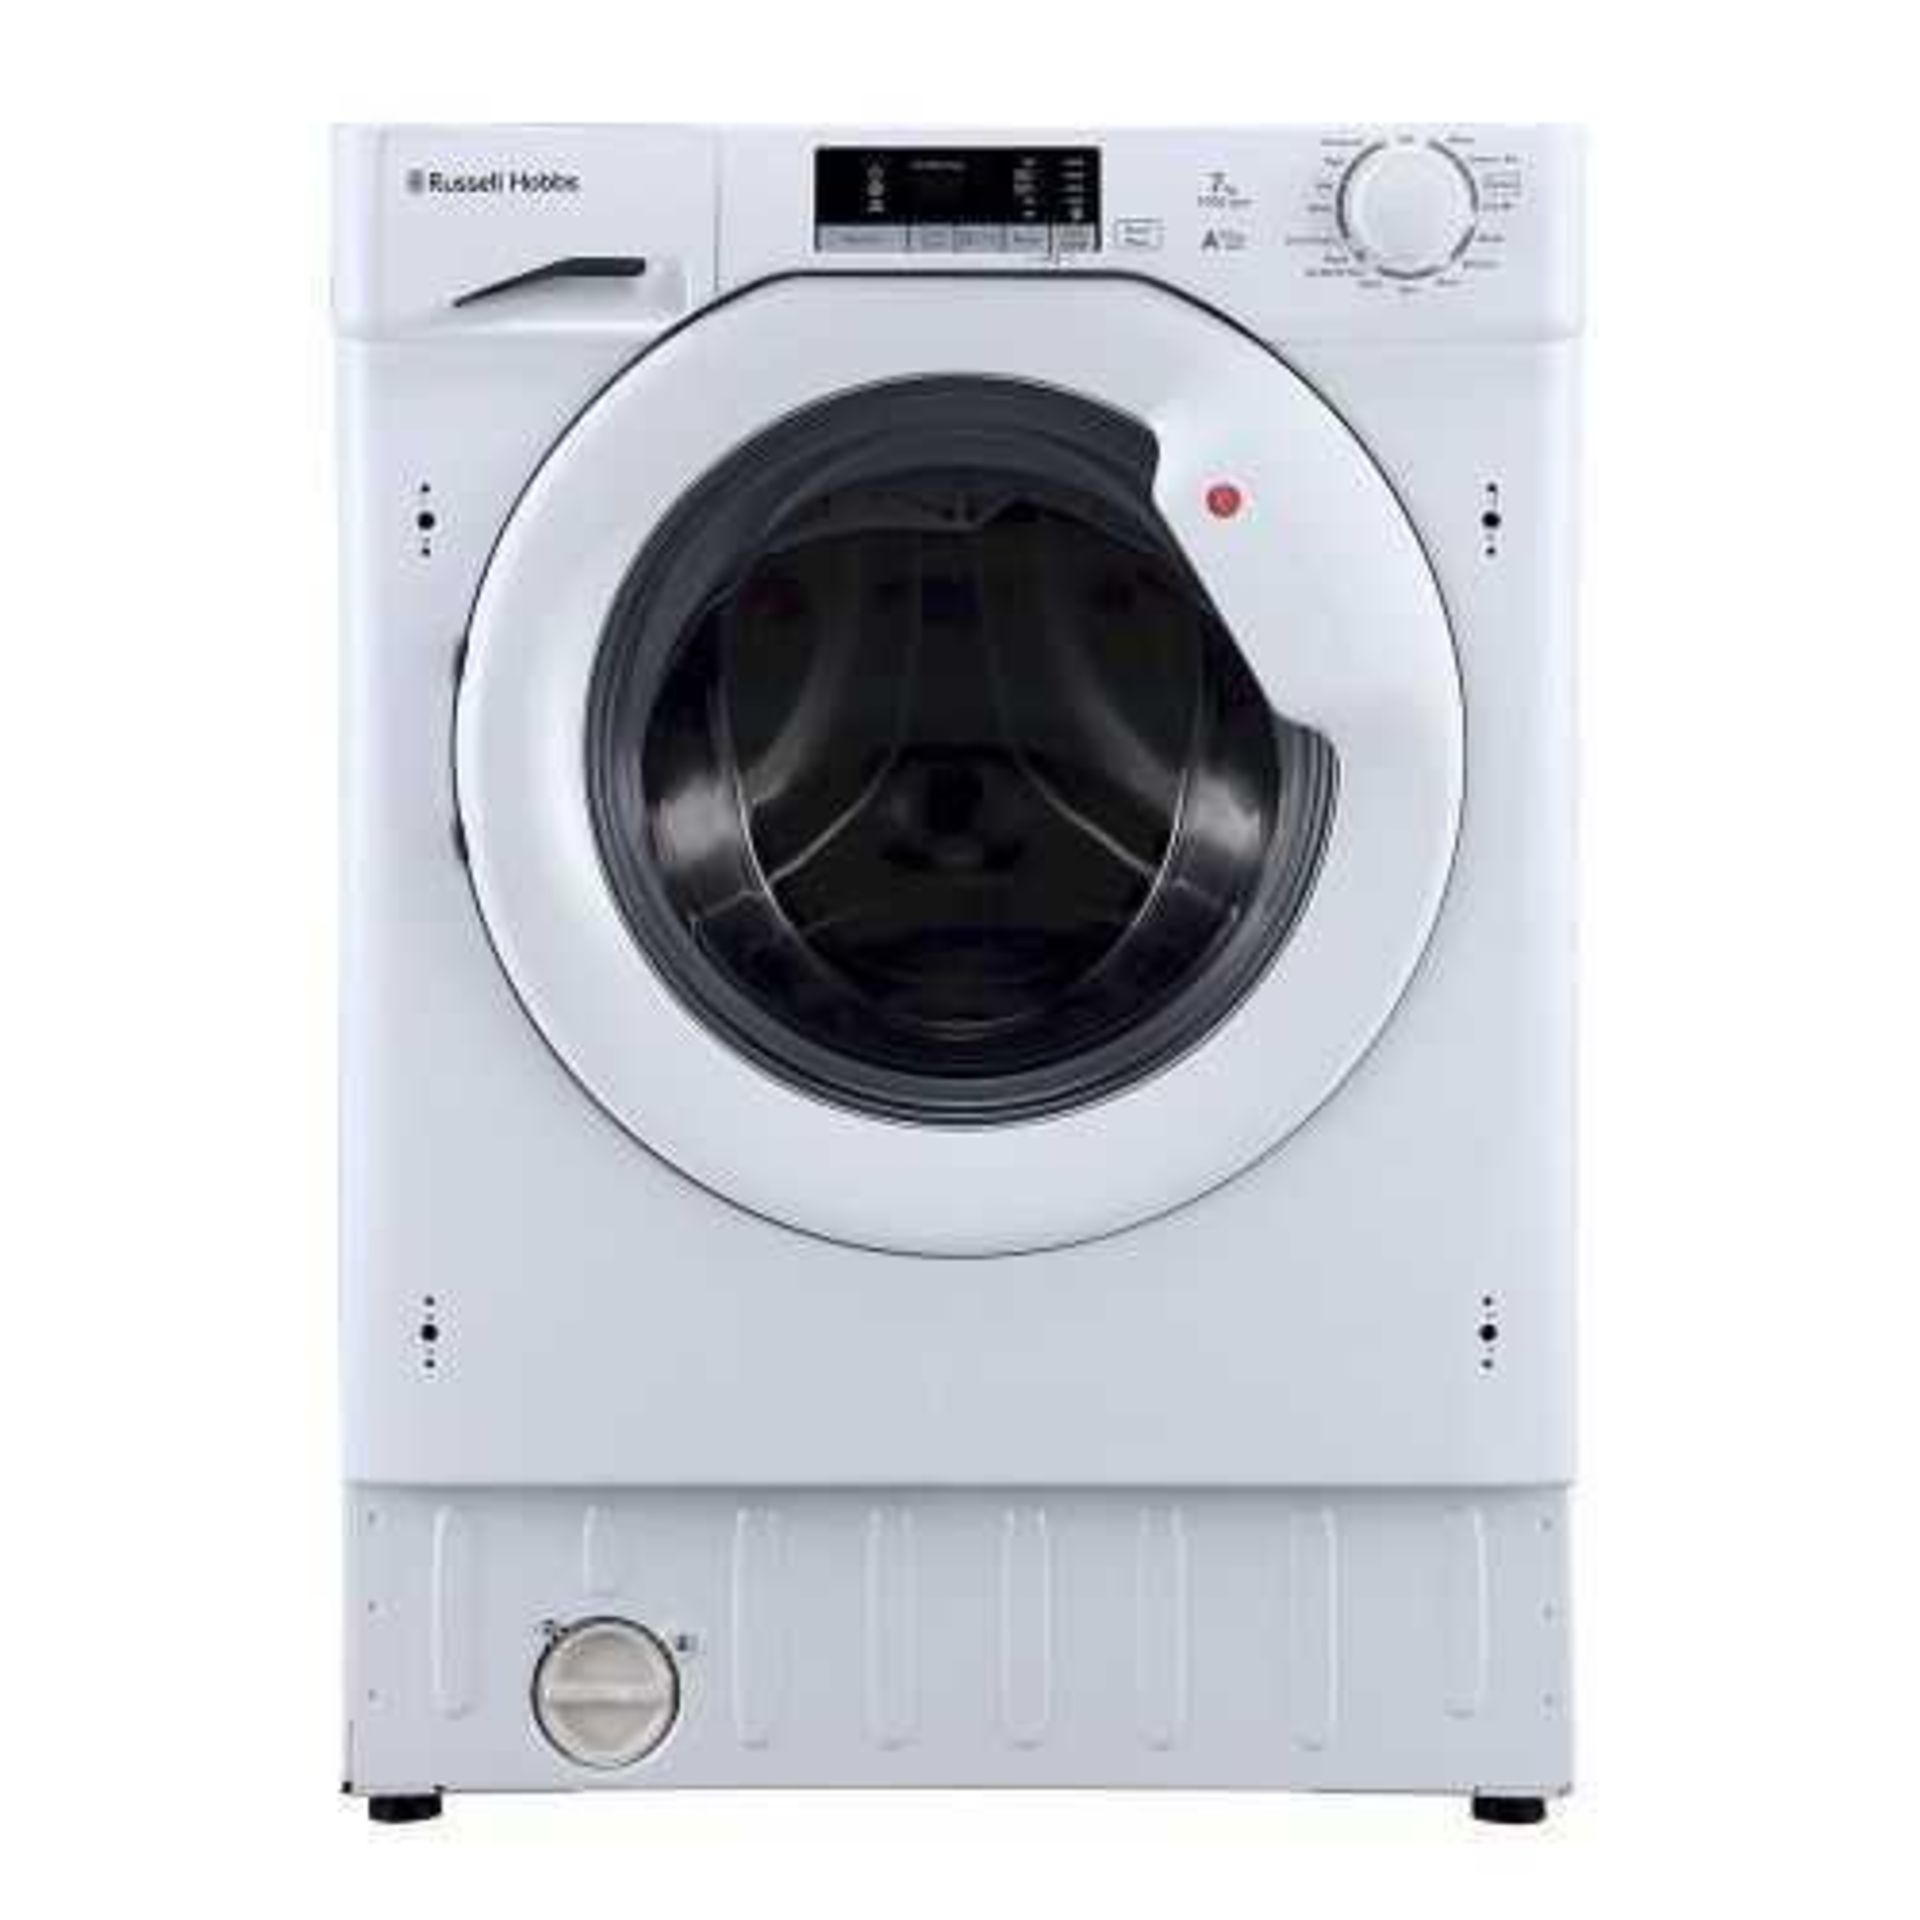 (Kw) RRP £379 Lot To Contain X1 Beko Intergrated Washing Machine 7Kg, White, Unboxed - Image 2 of 4